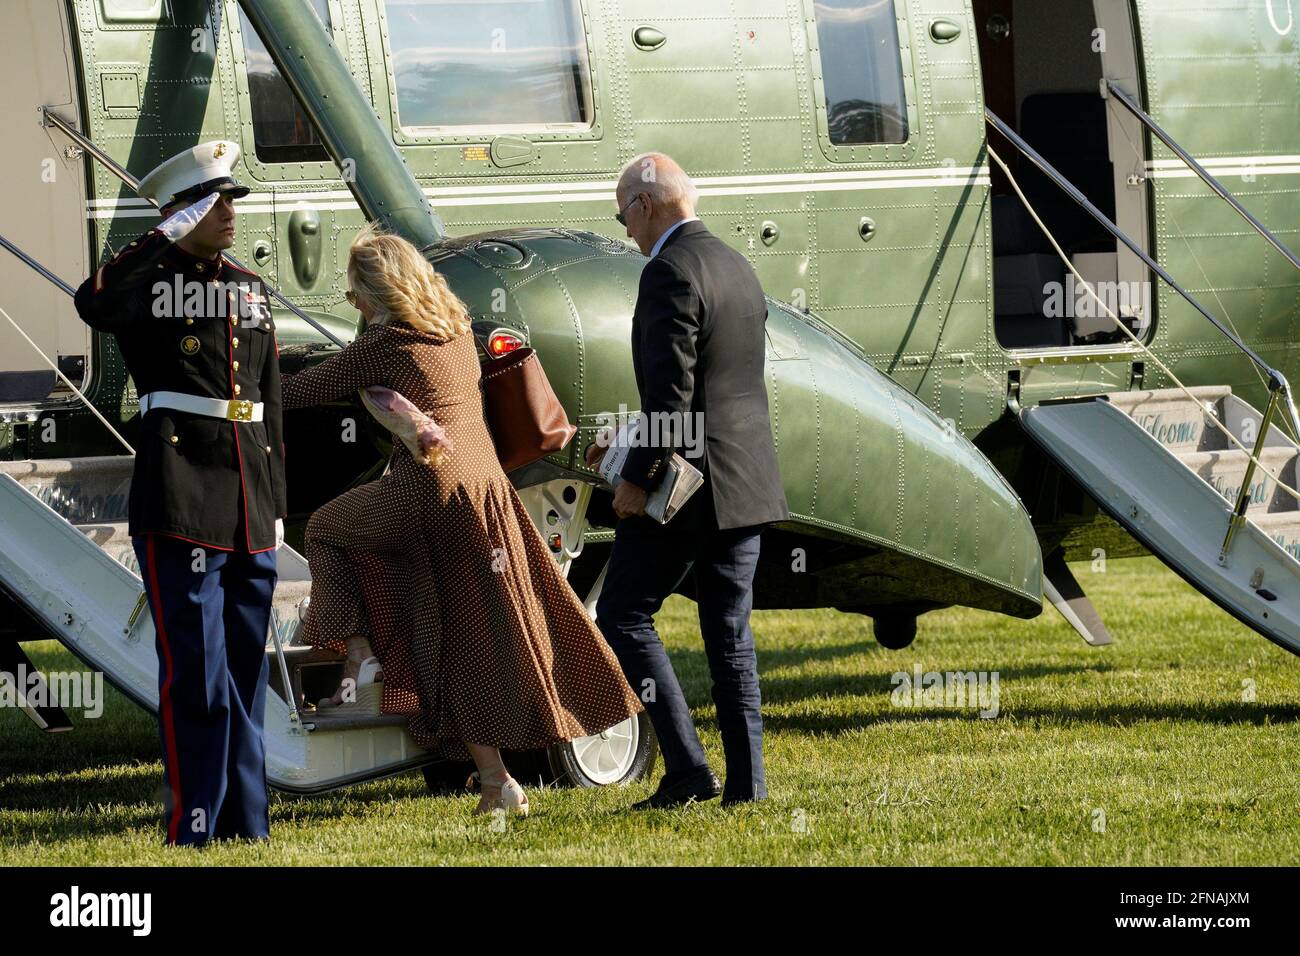 U.S. President Joe Biden and first lady Jill Biden board Marine One as they depart from the White House en route to Wilmington, Delaware from the Ellipse in Washington, U.S., May 15, 2021. REUTERS/Yuri Gripas Stock Photo